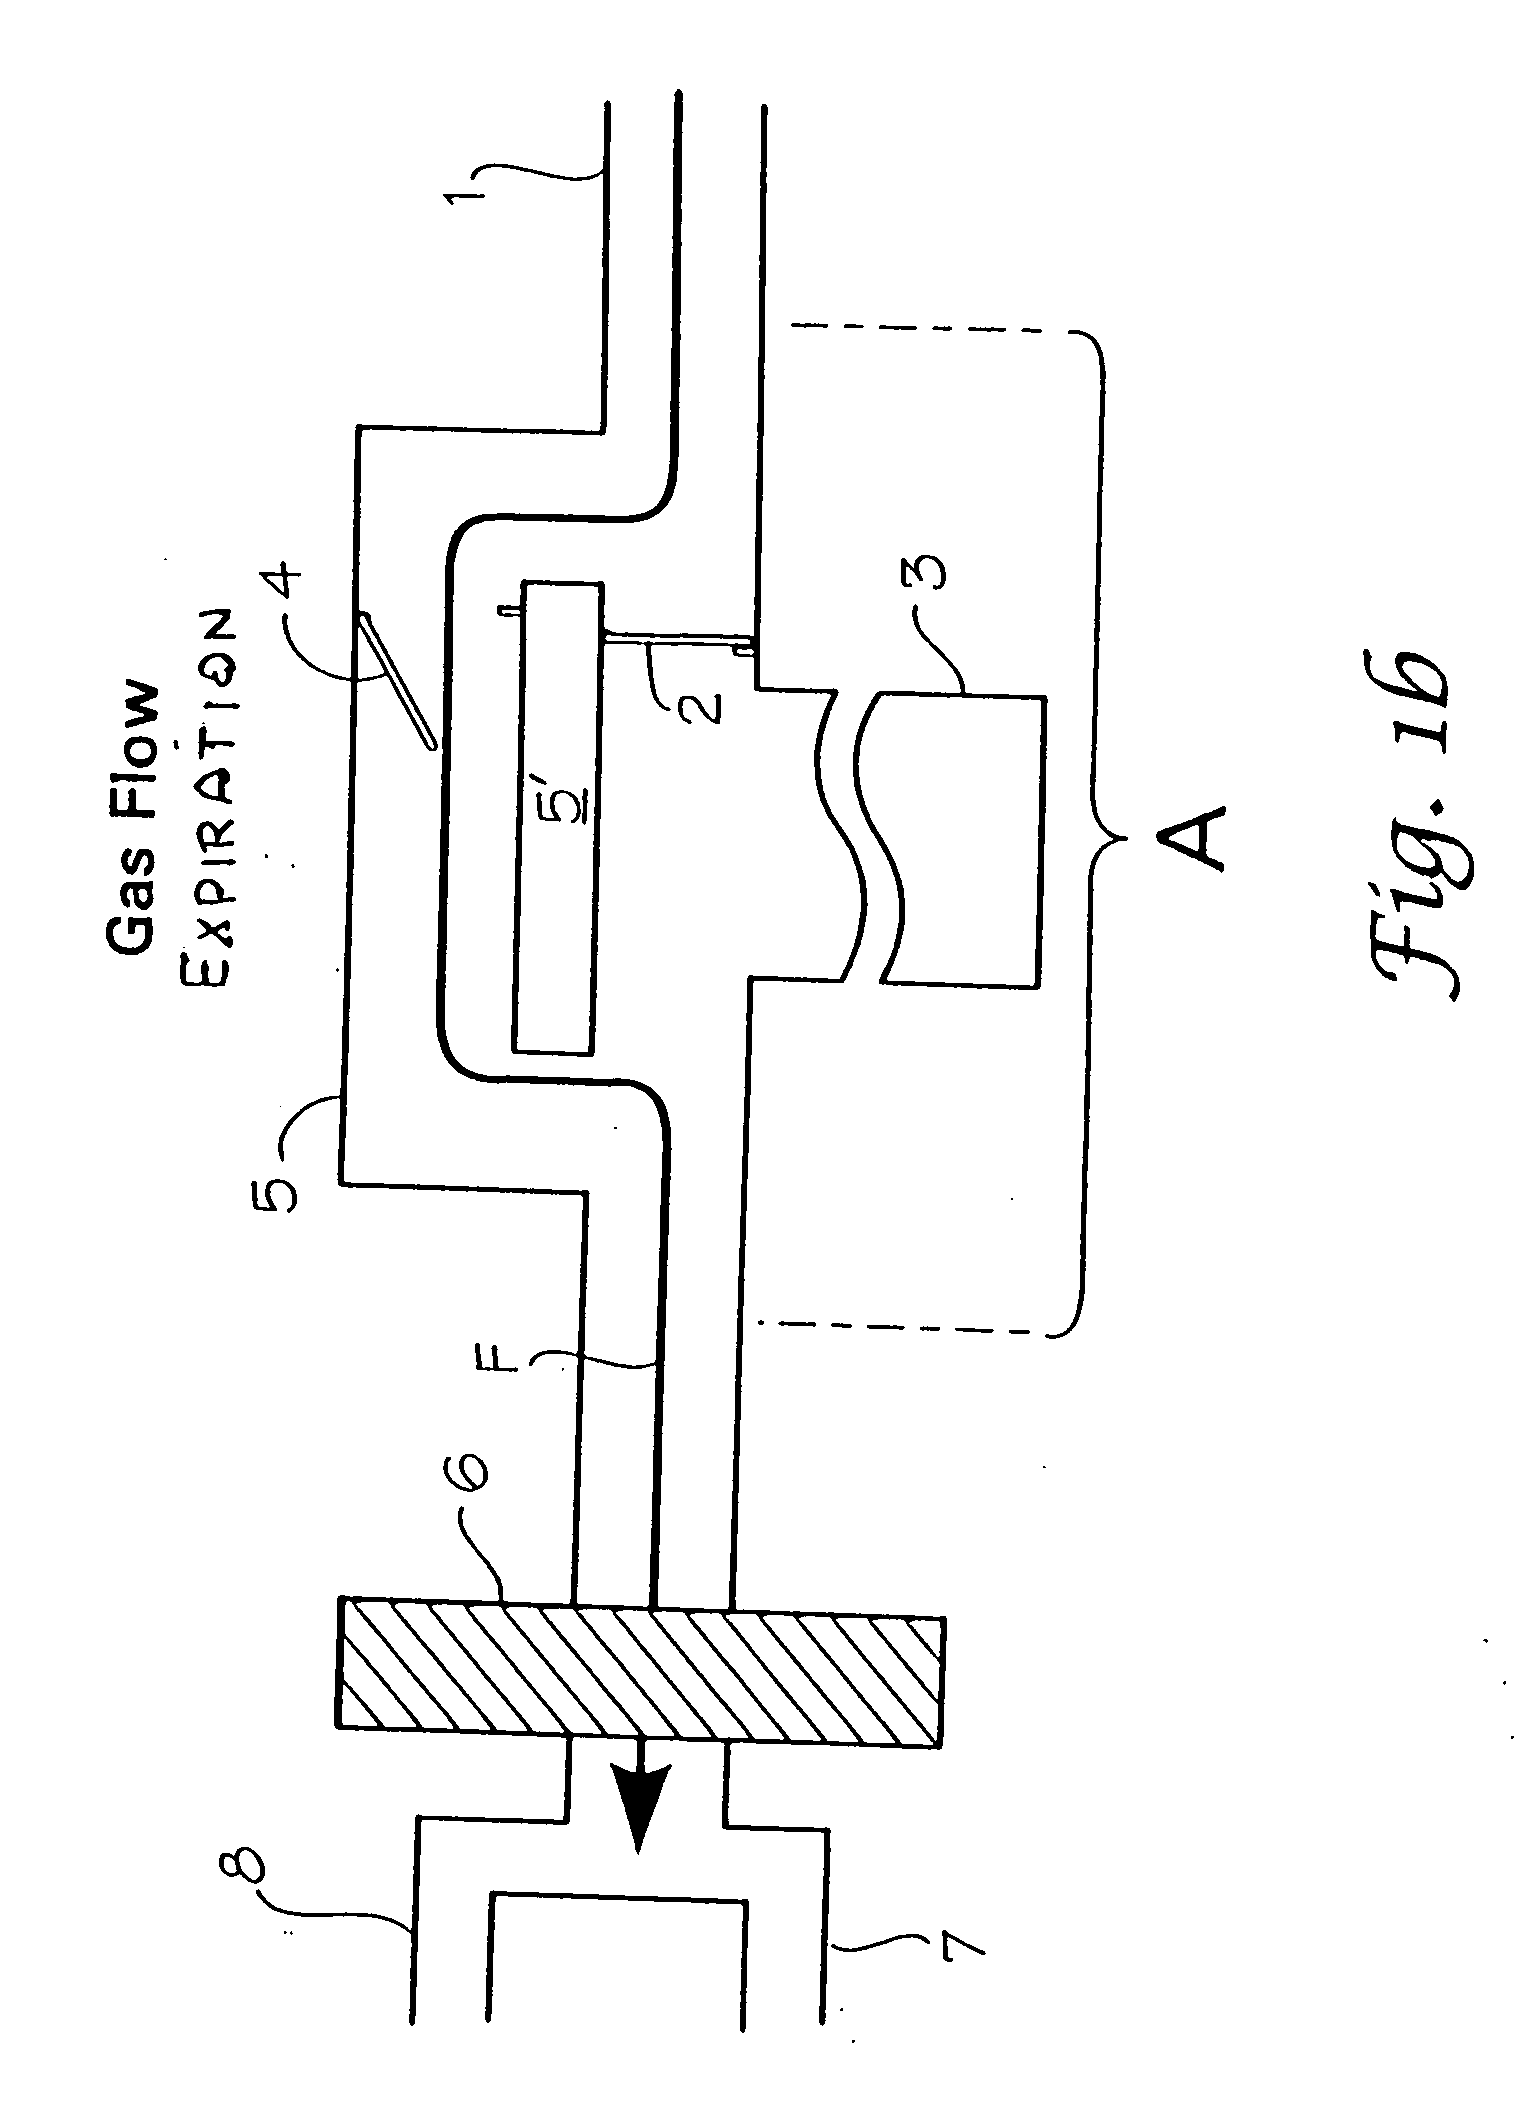 Device for influencing gas flows